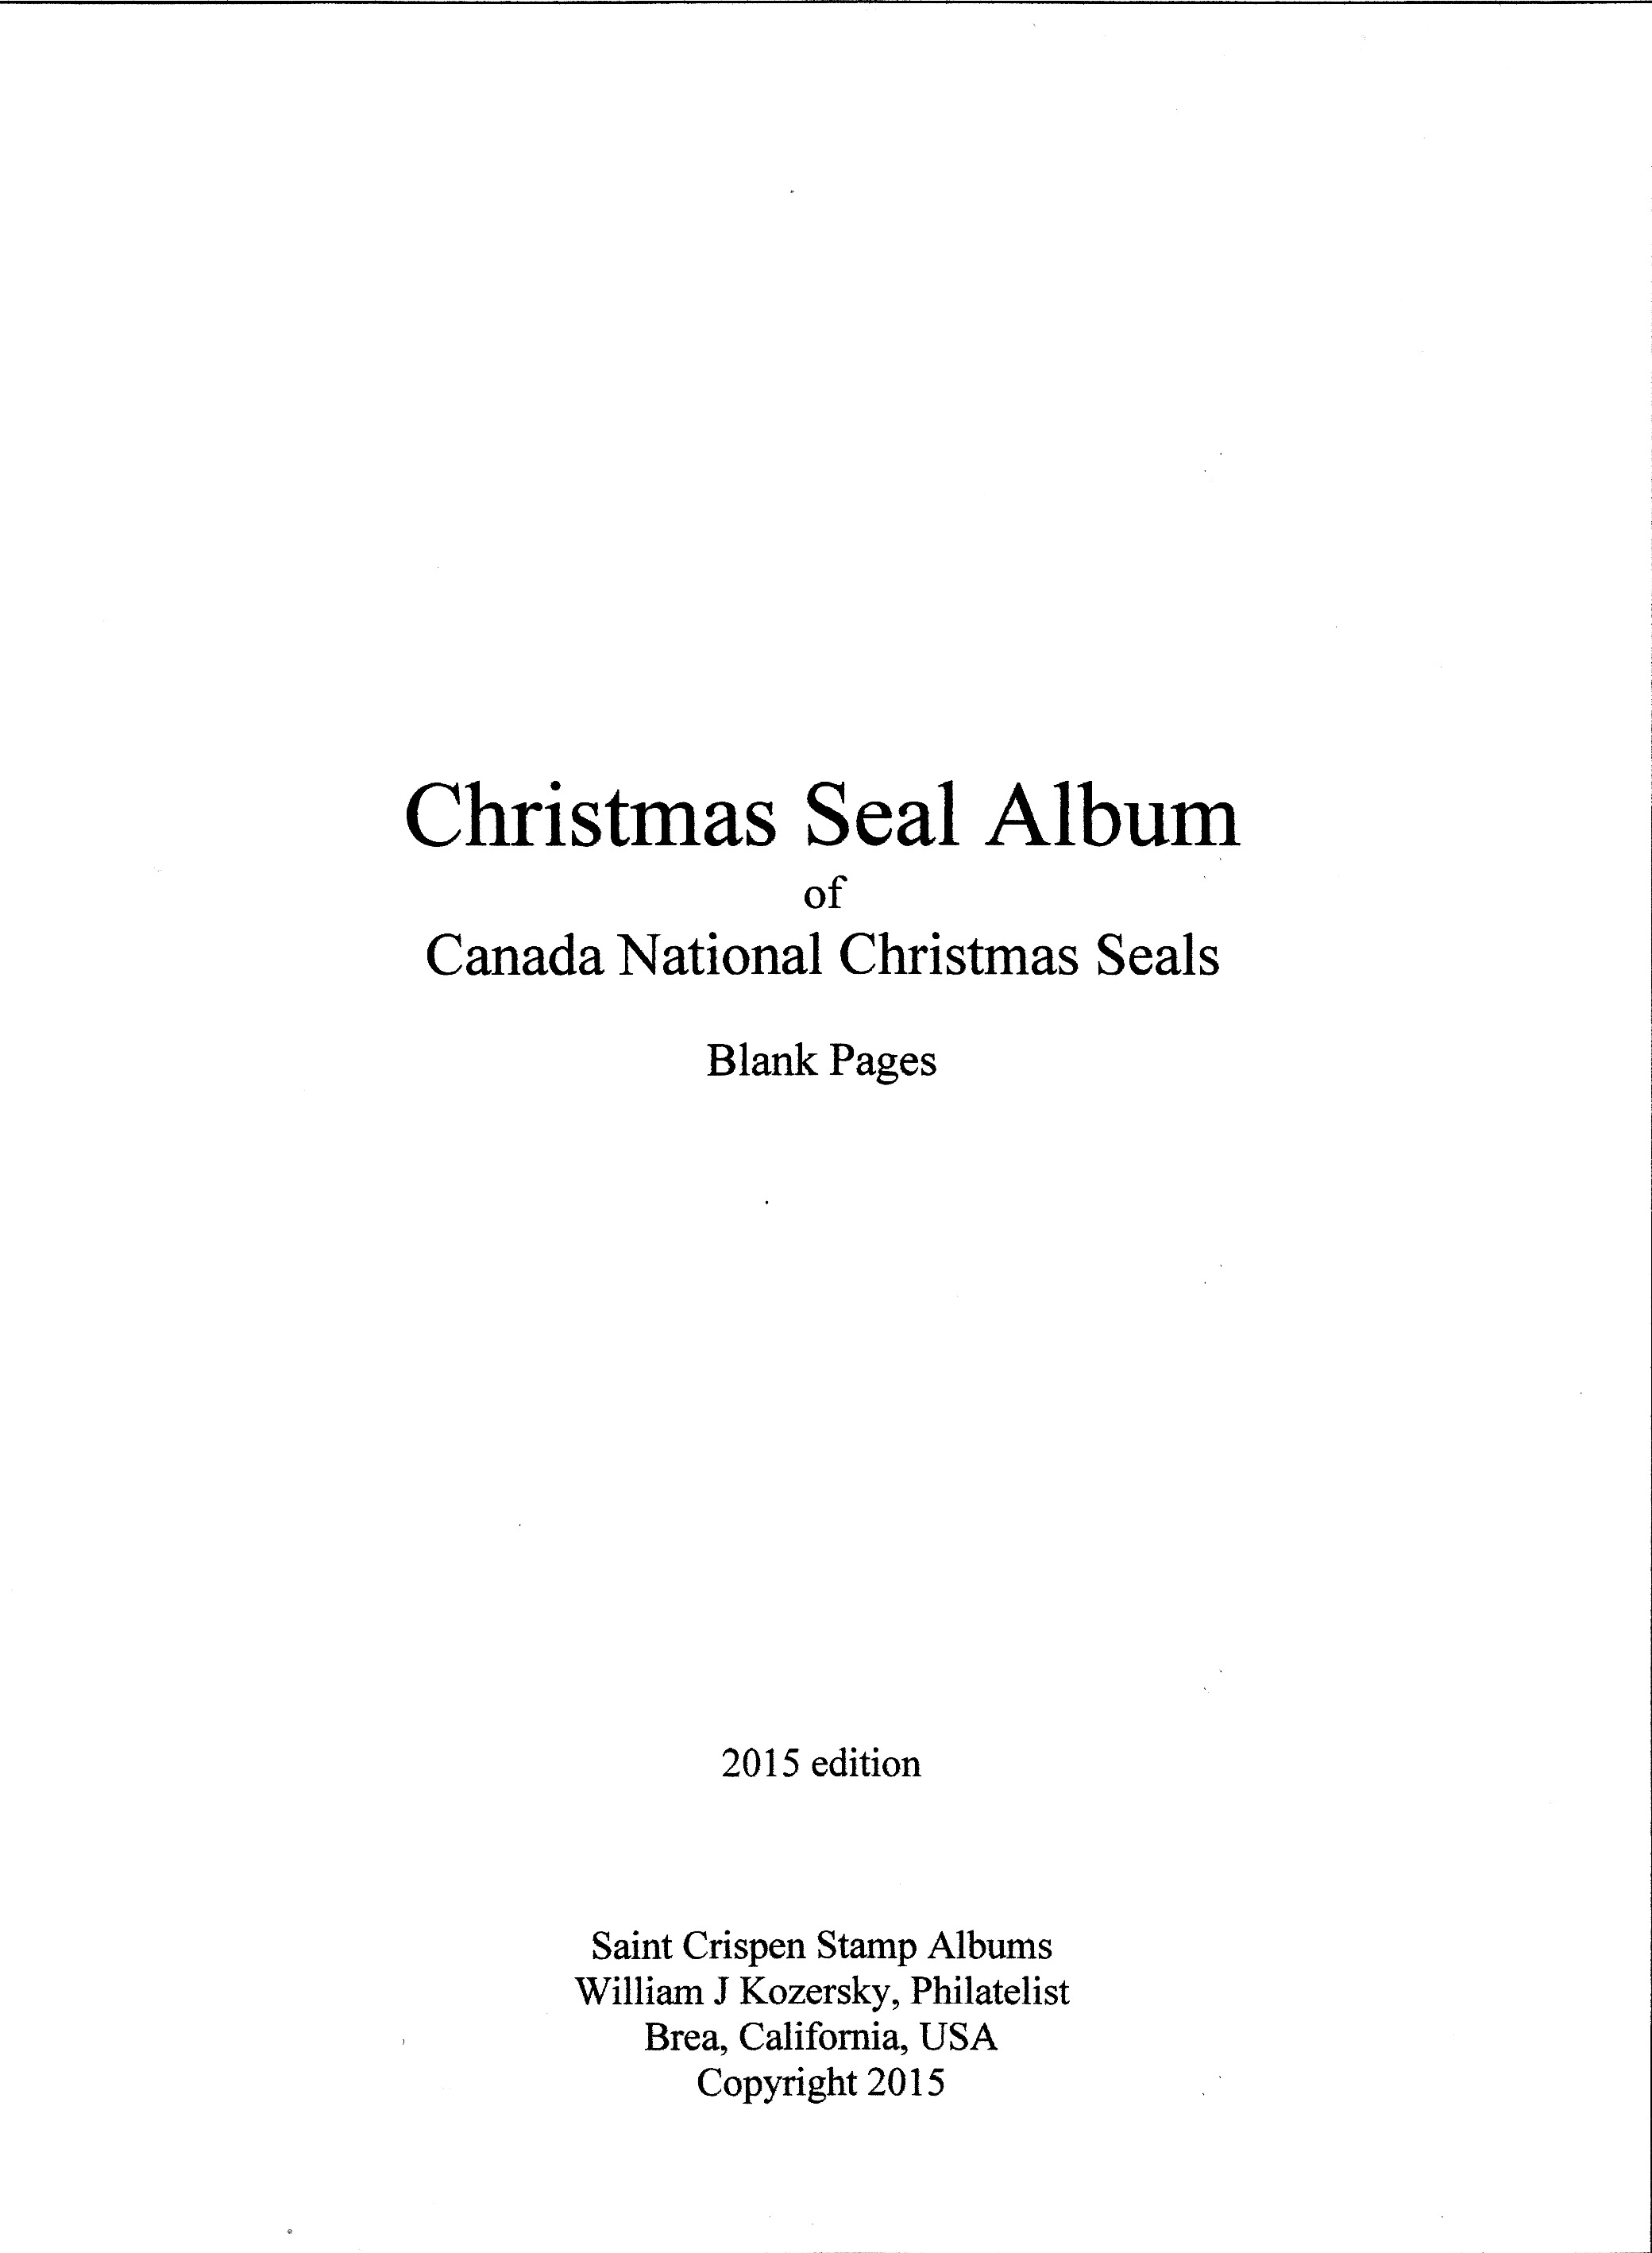 Canada National Christmas Seal Stamp Album Pages blank pages with title & border